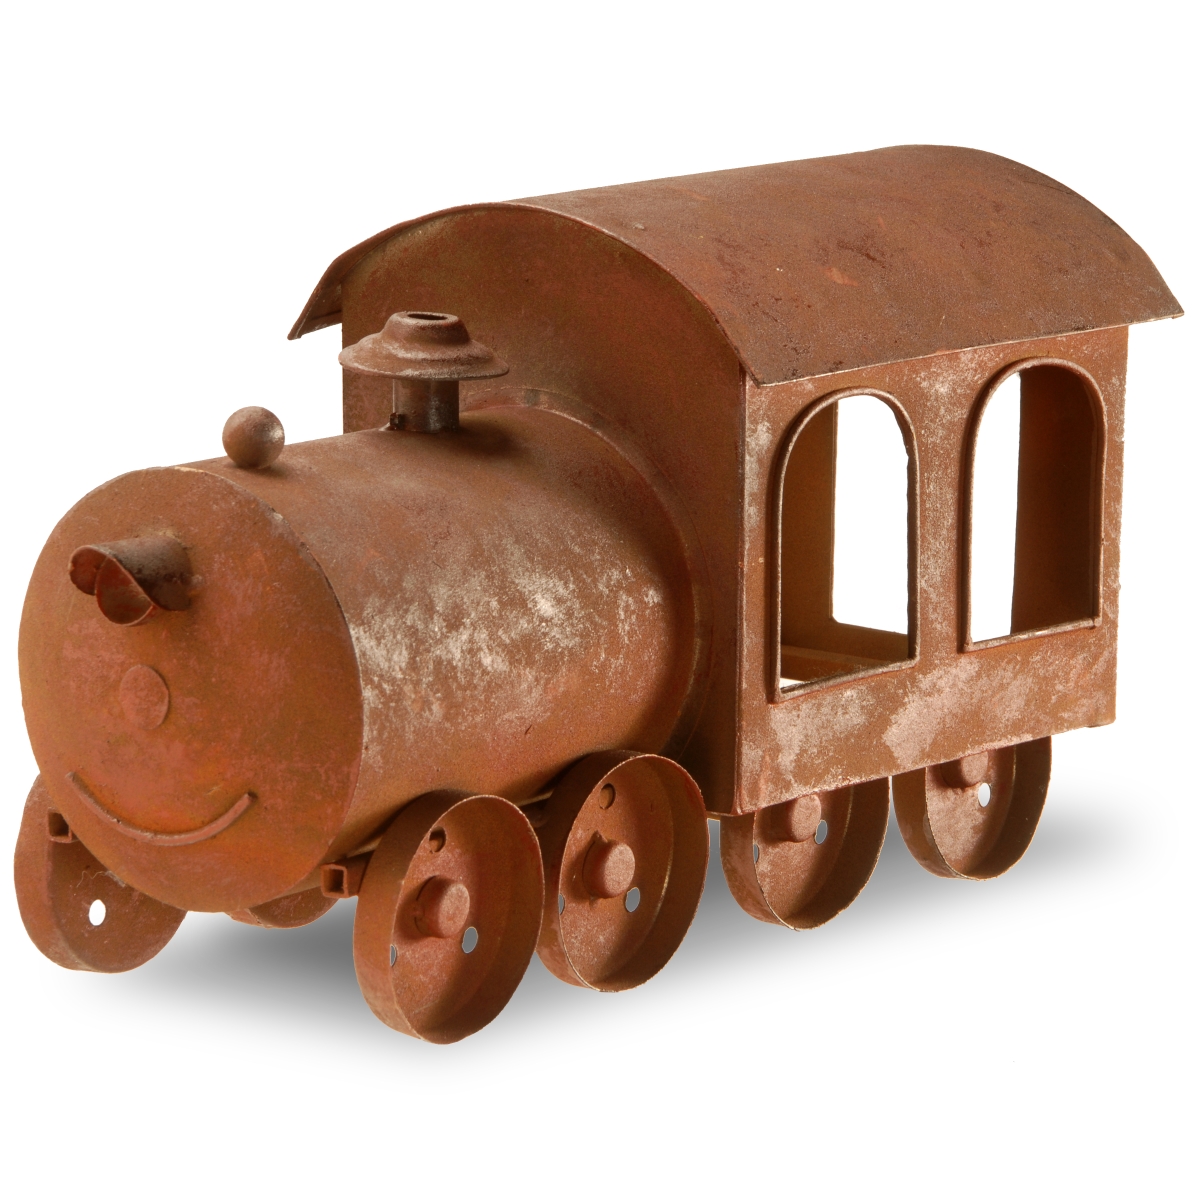 National Tree Ras-hr130528 Iron Train Candle Holder